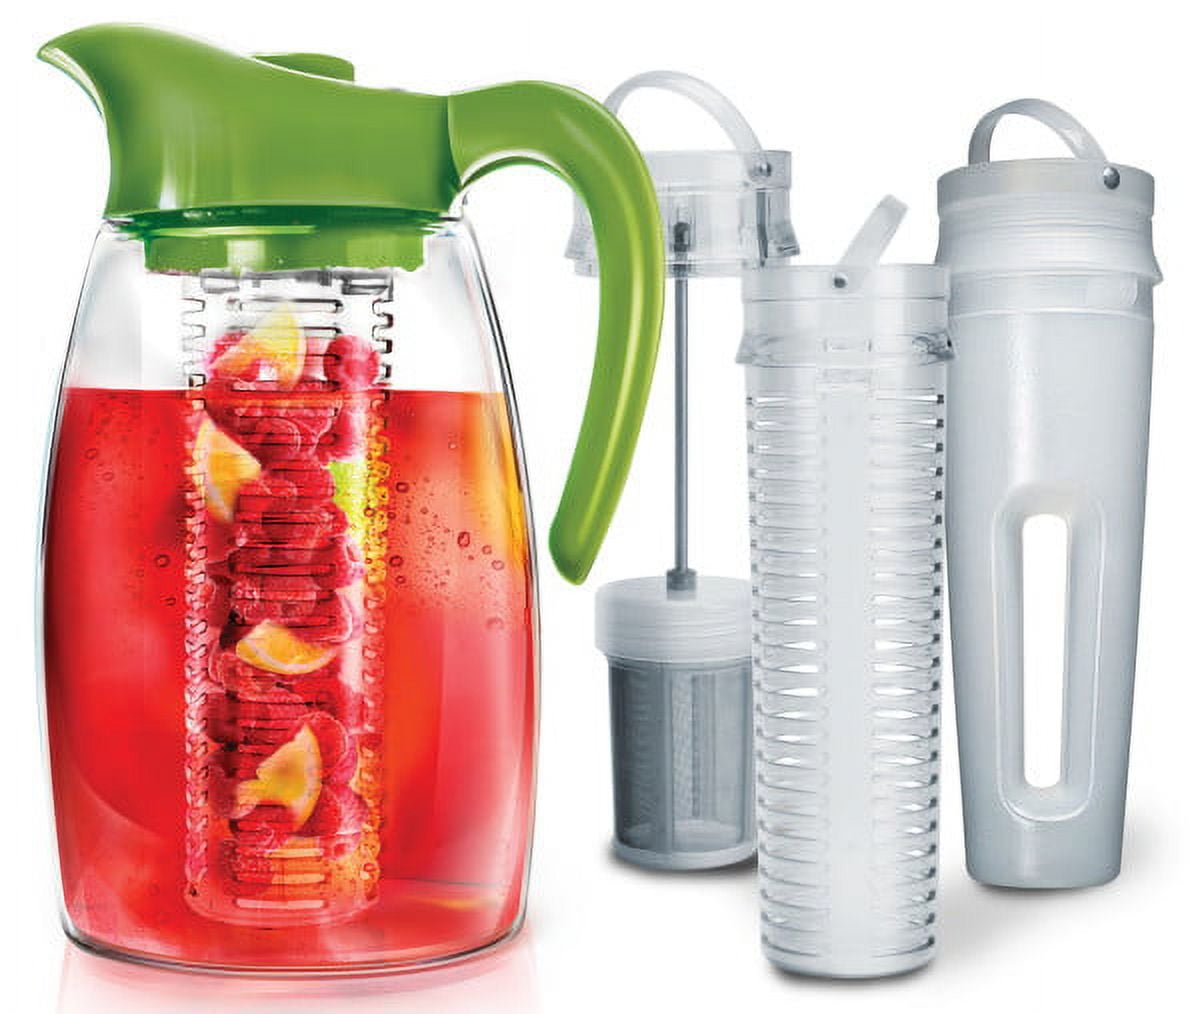 2-Qt./2 L Pitcher with Infuser Insert